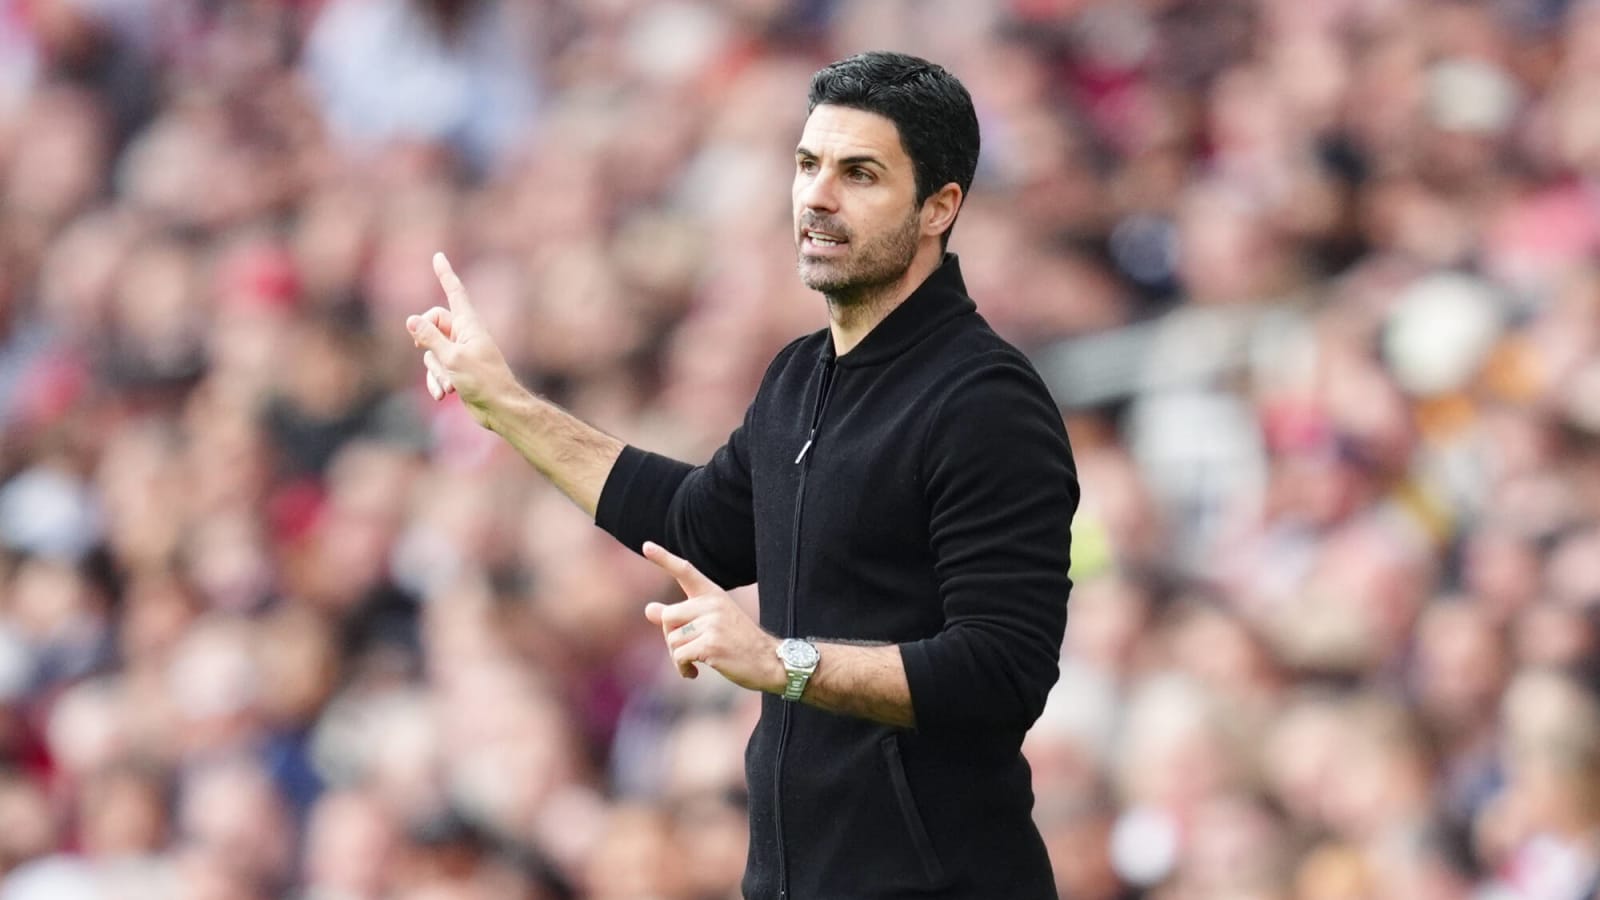 Is it time for Arsenal to persuade Mikel Arteta to sign a new contract?